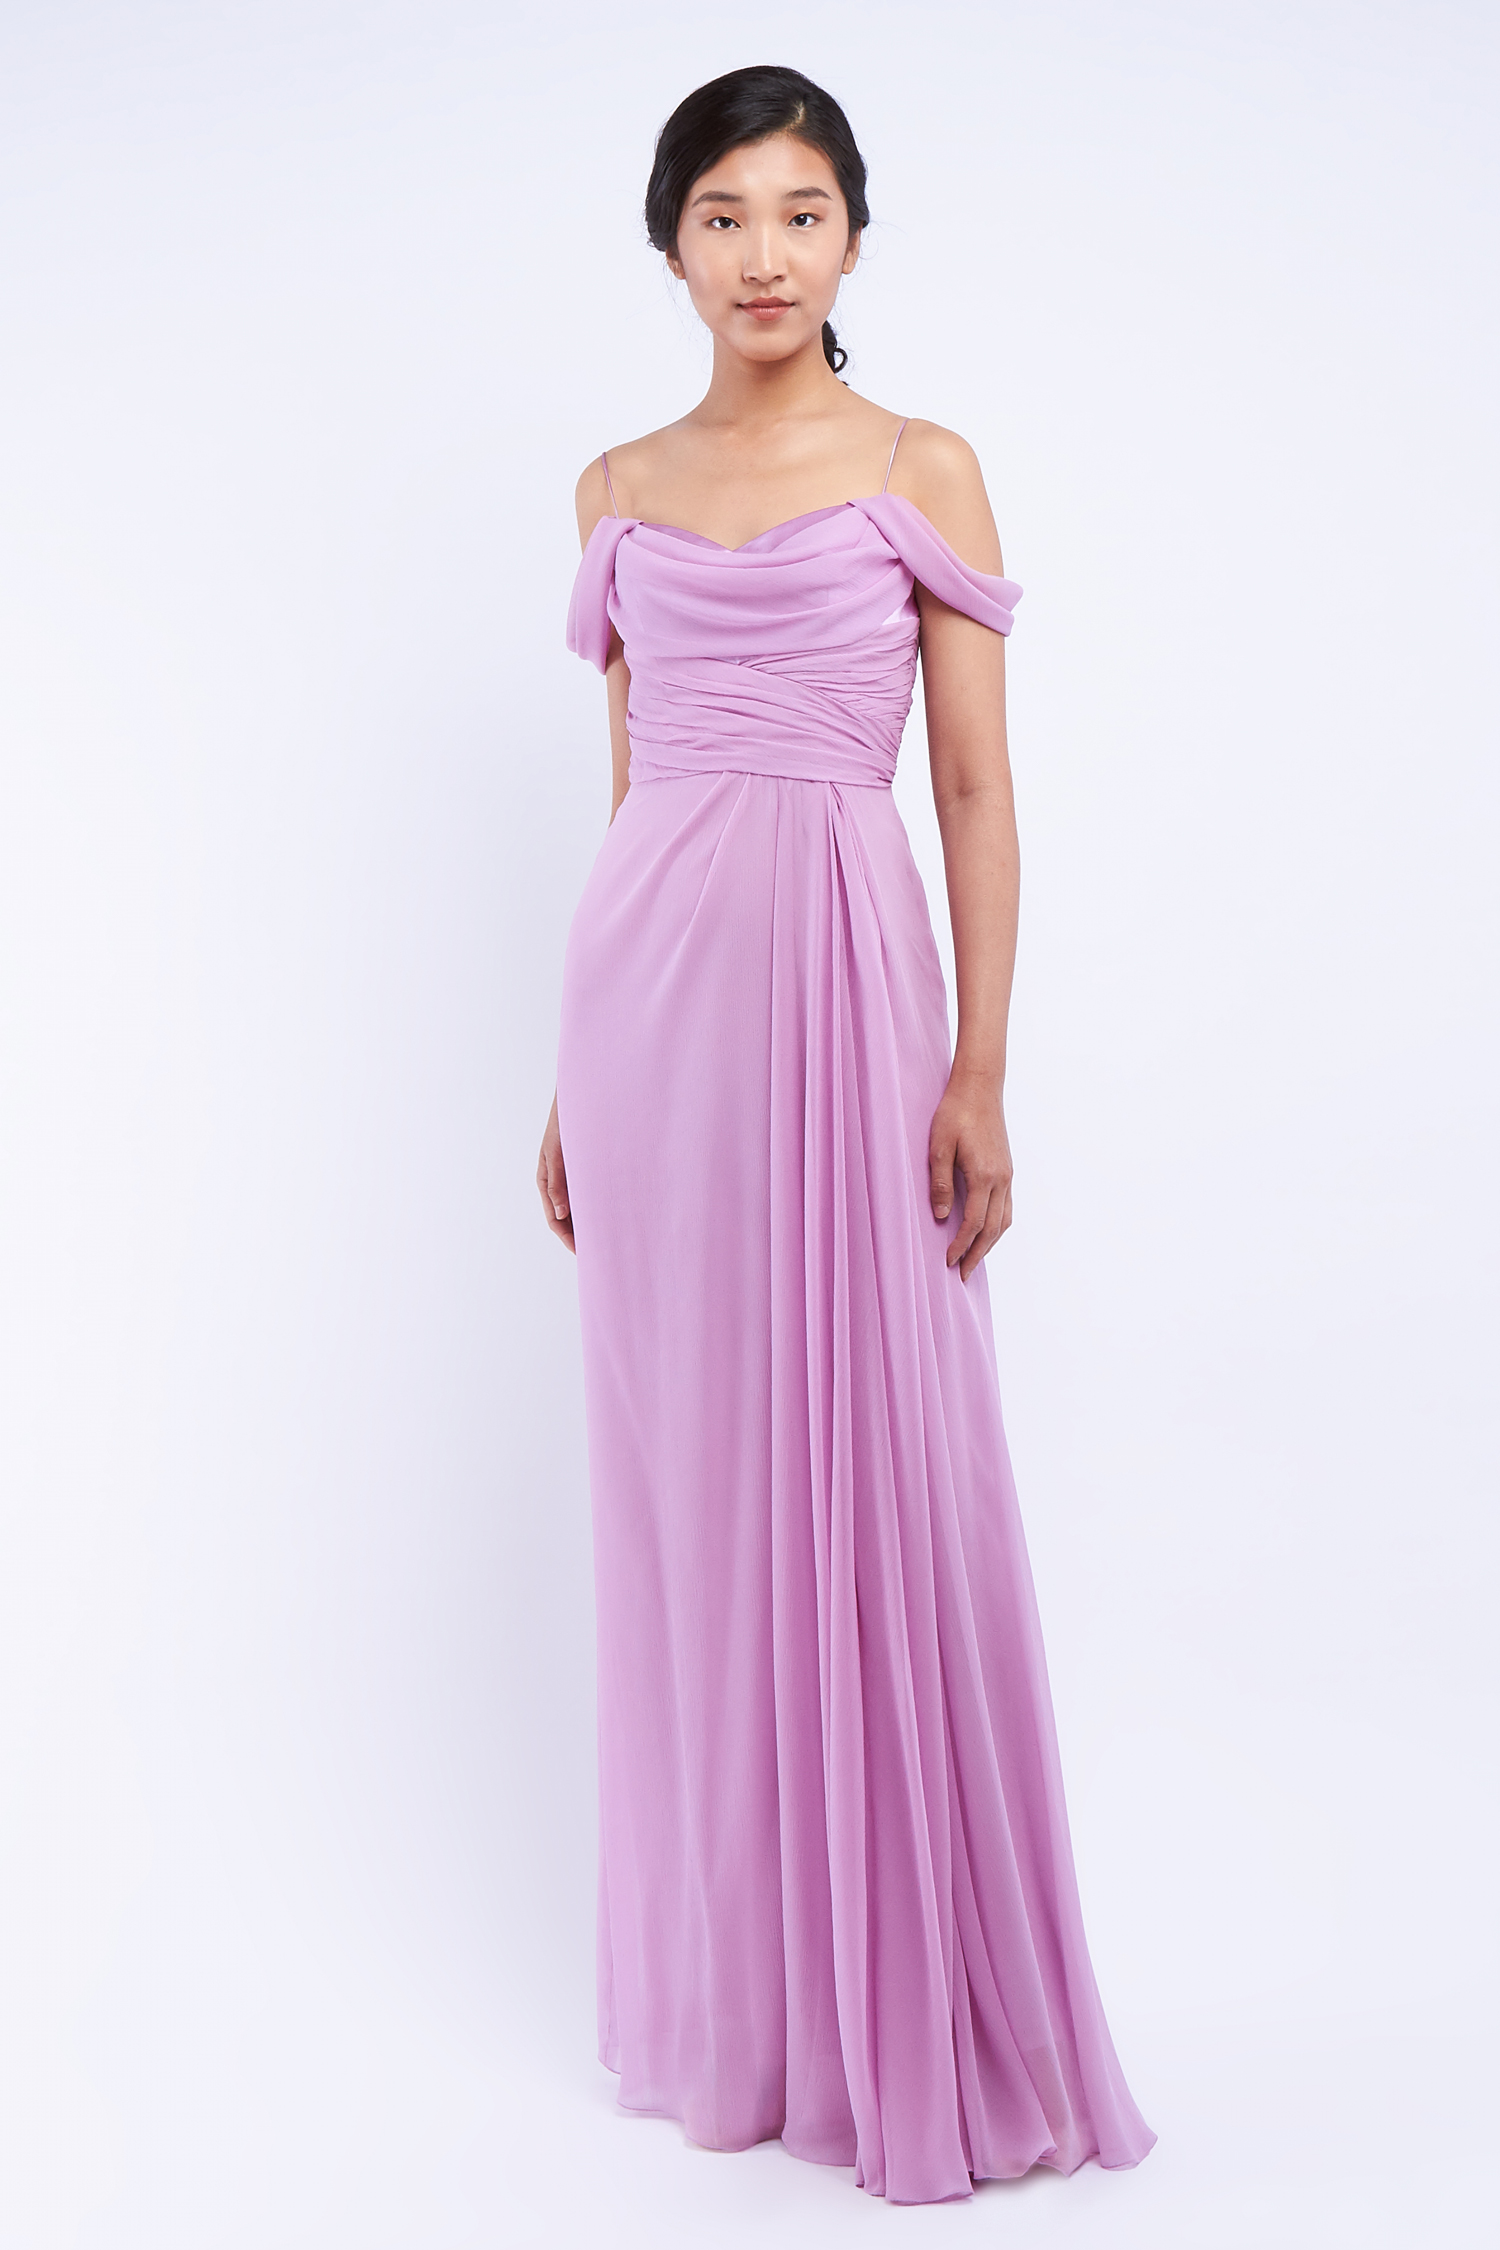 Gown with draped and pleated bodice - Commitment Look 7 - Verdin New York